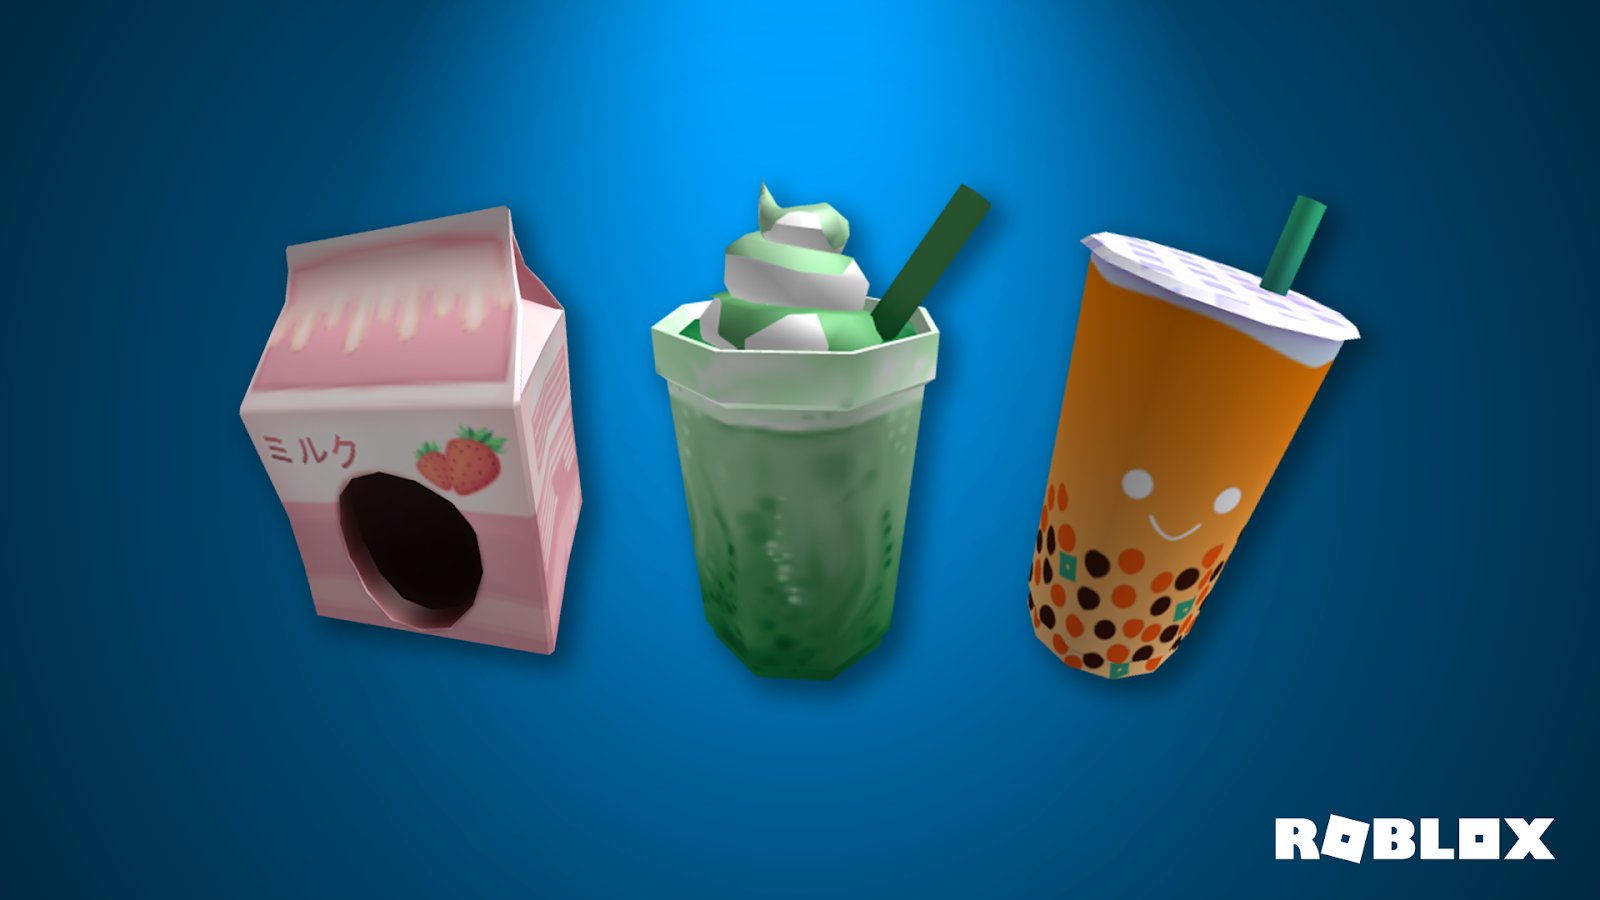 Roblox On Twitter It S A Hot Day You Re Thirsty Which Do You